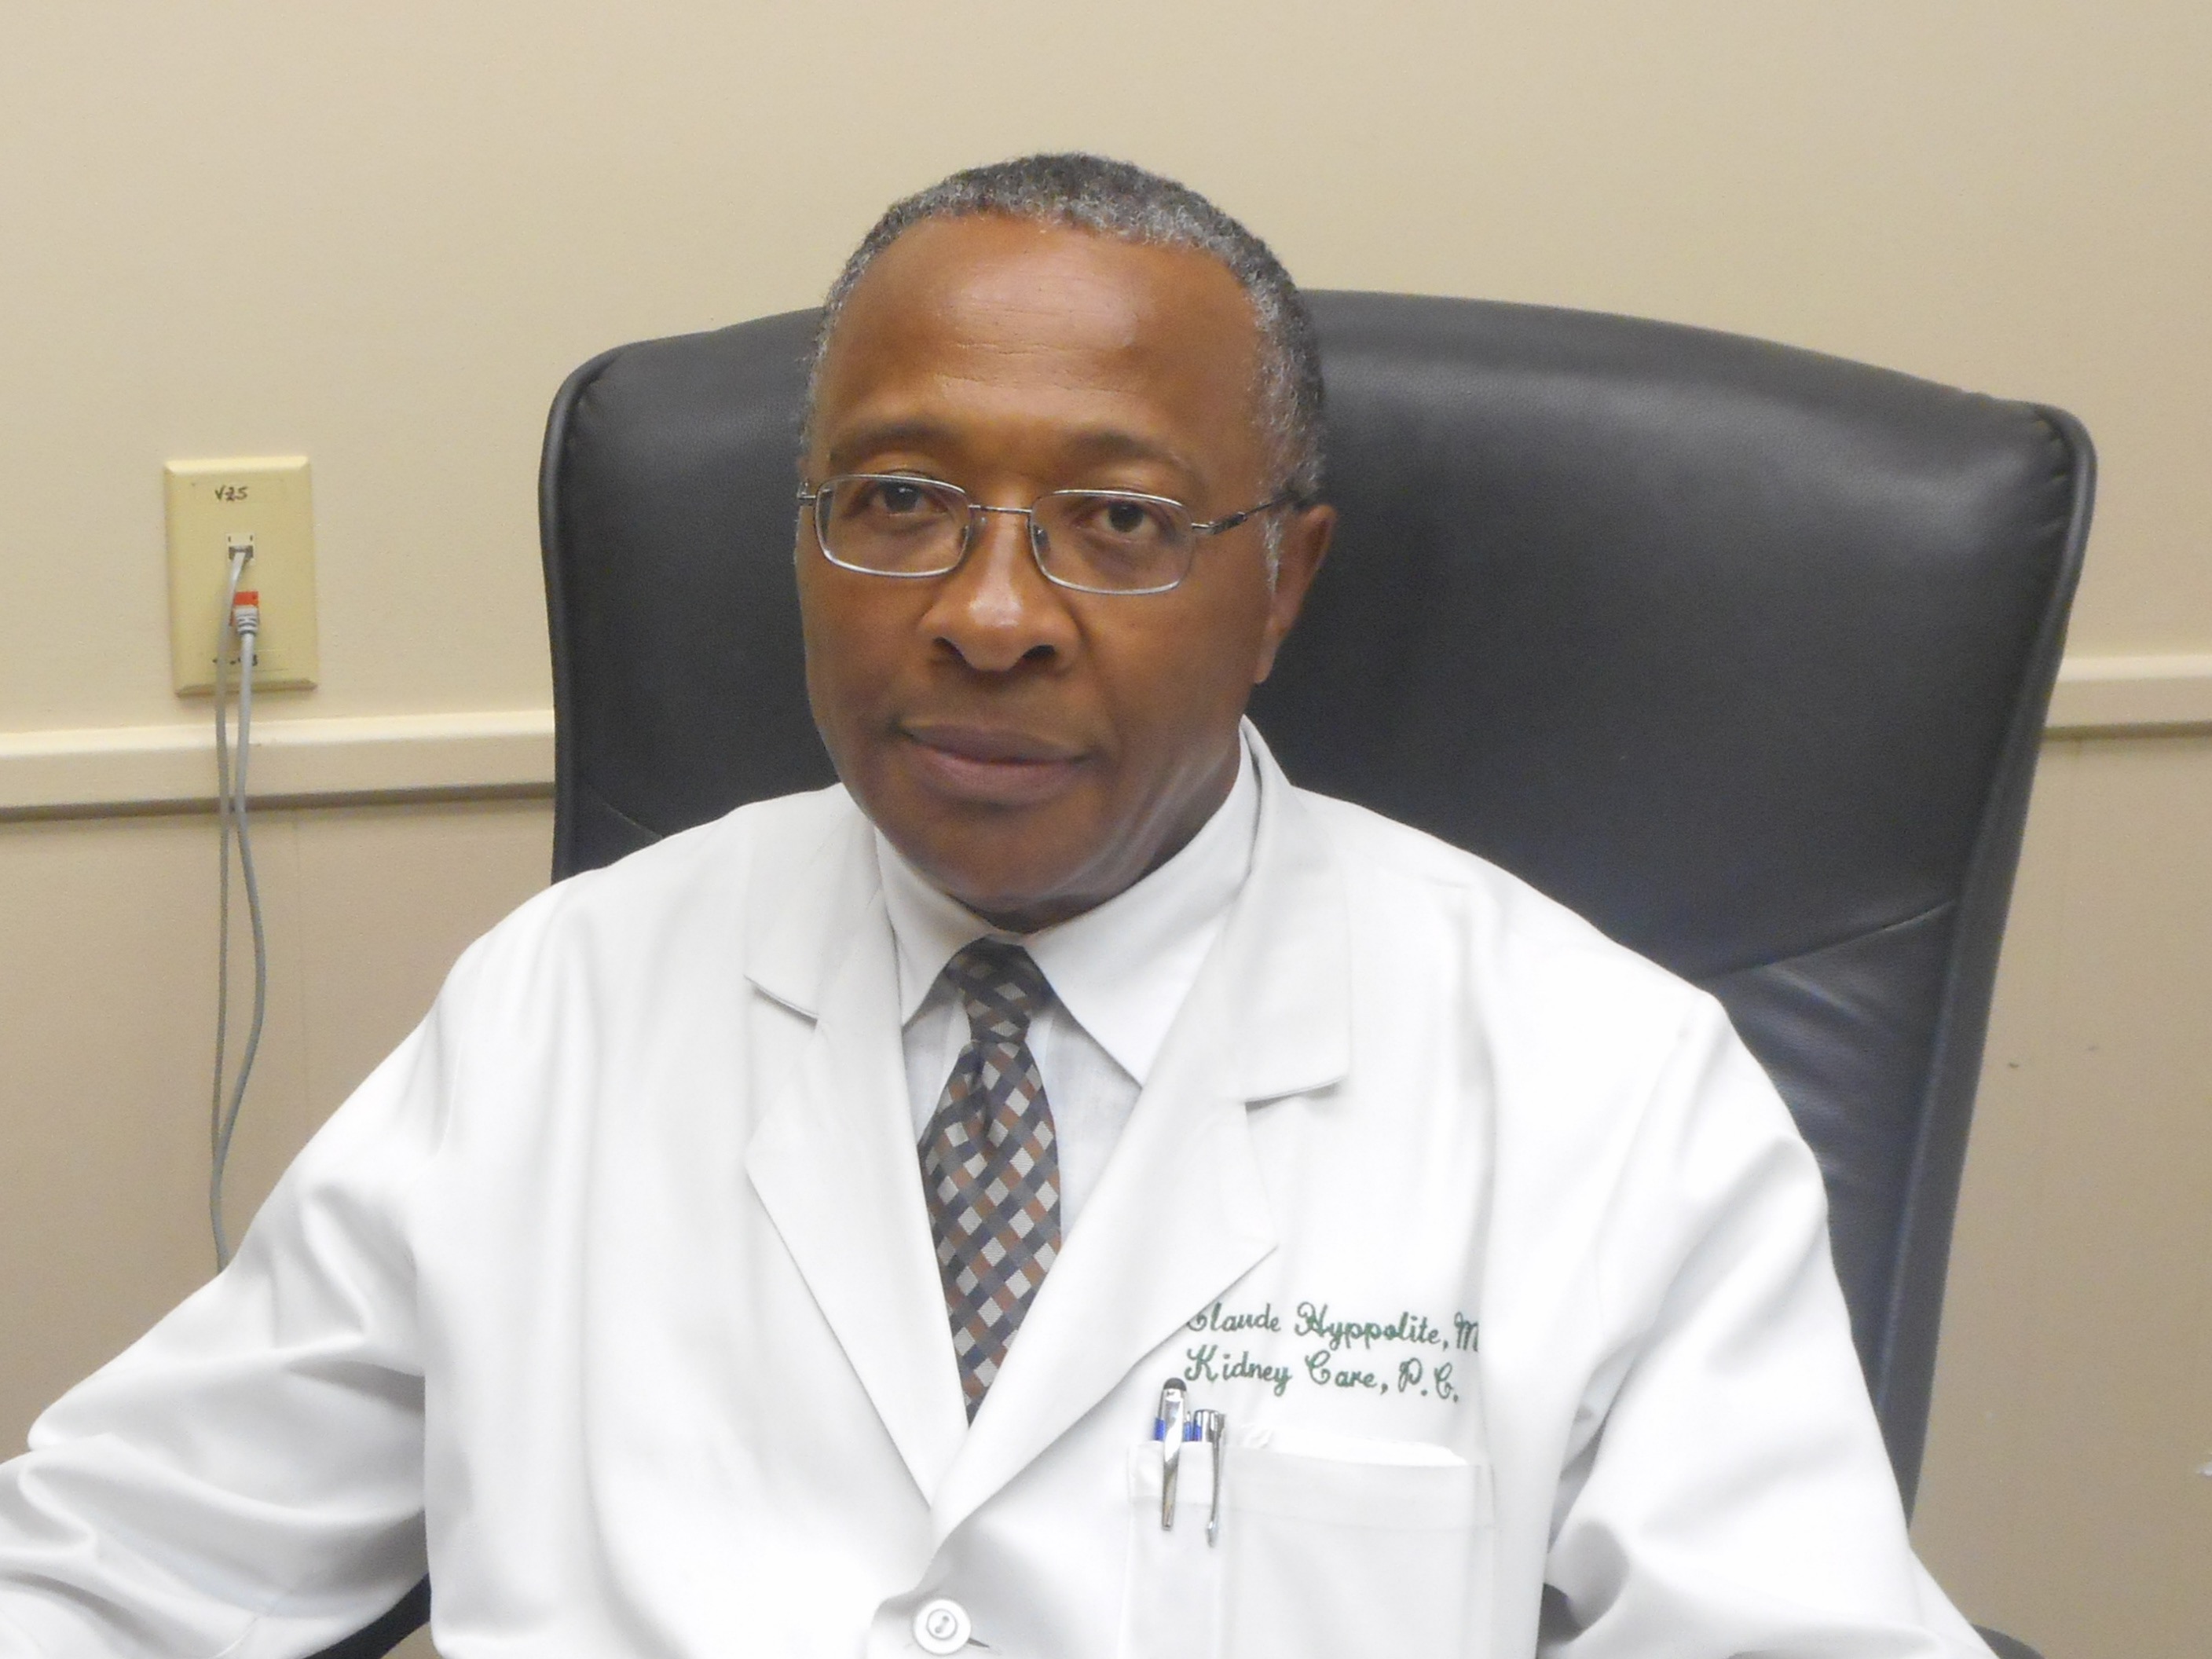 A picture of Dr. Hyppolite